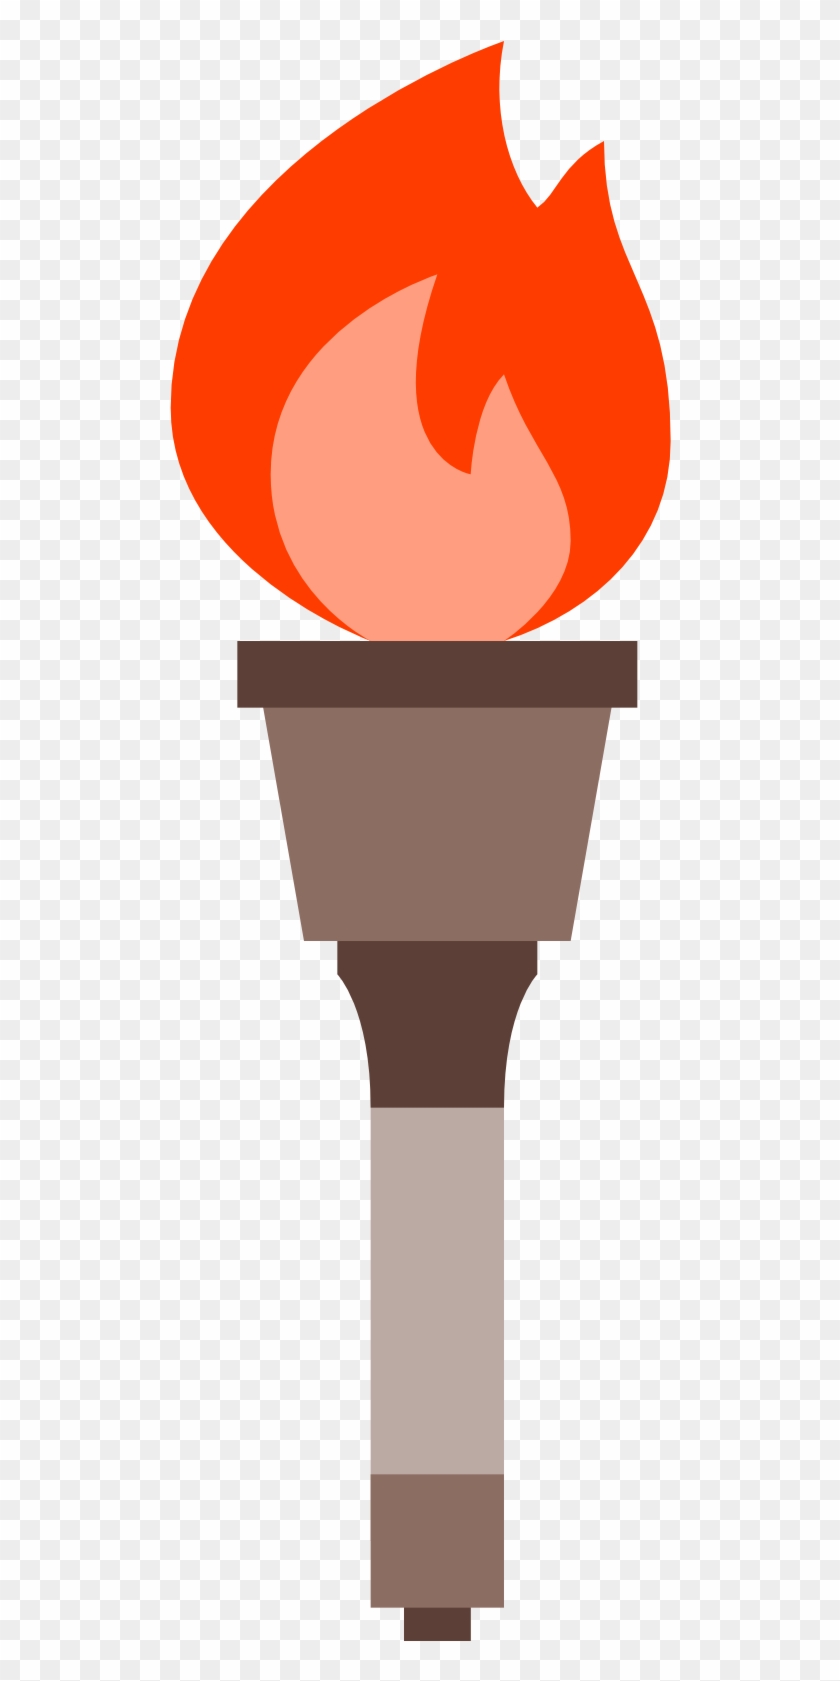 Olympic Torch - Transparent Background Torch Icon Clipart #84699